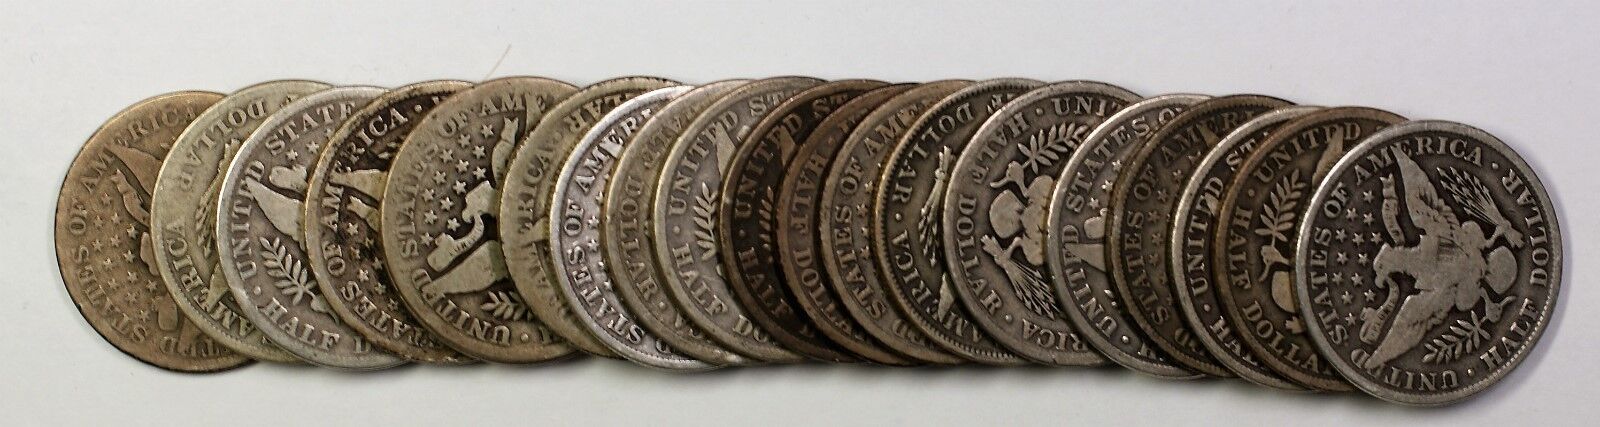 1908 Barber Half Dollar 50c Roll 20 Circulated 90% Old Silver Coins Lot